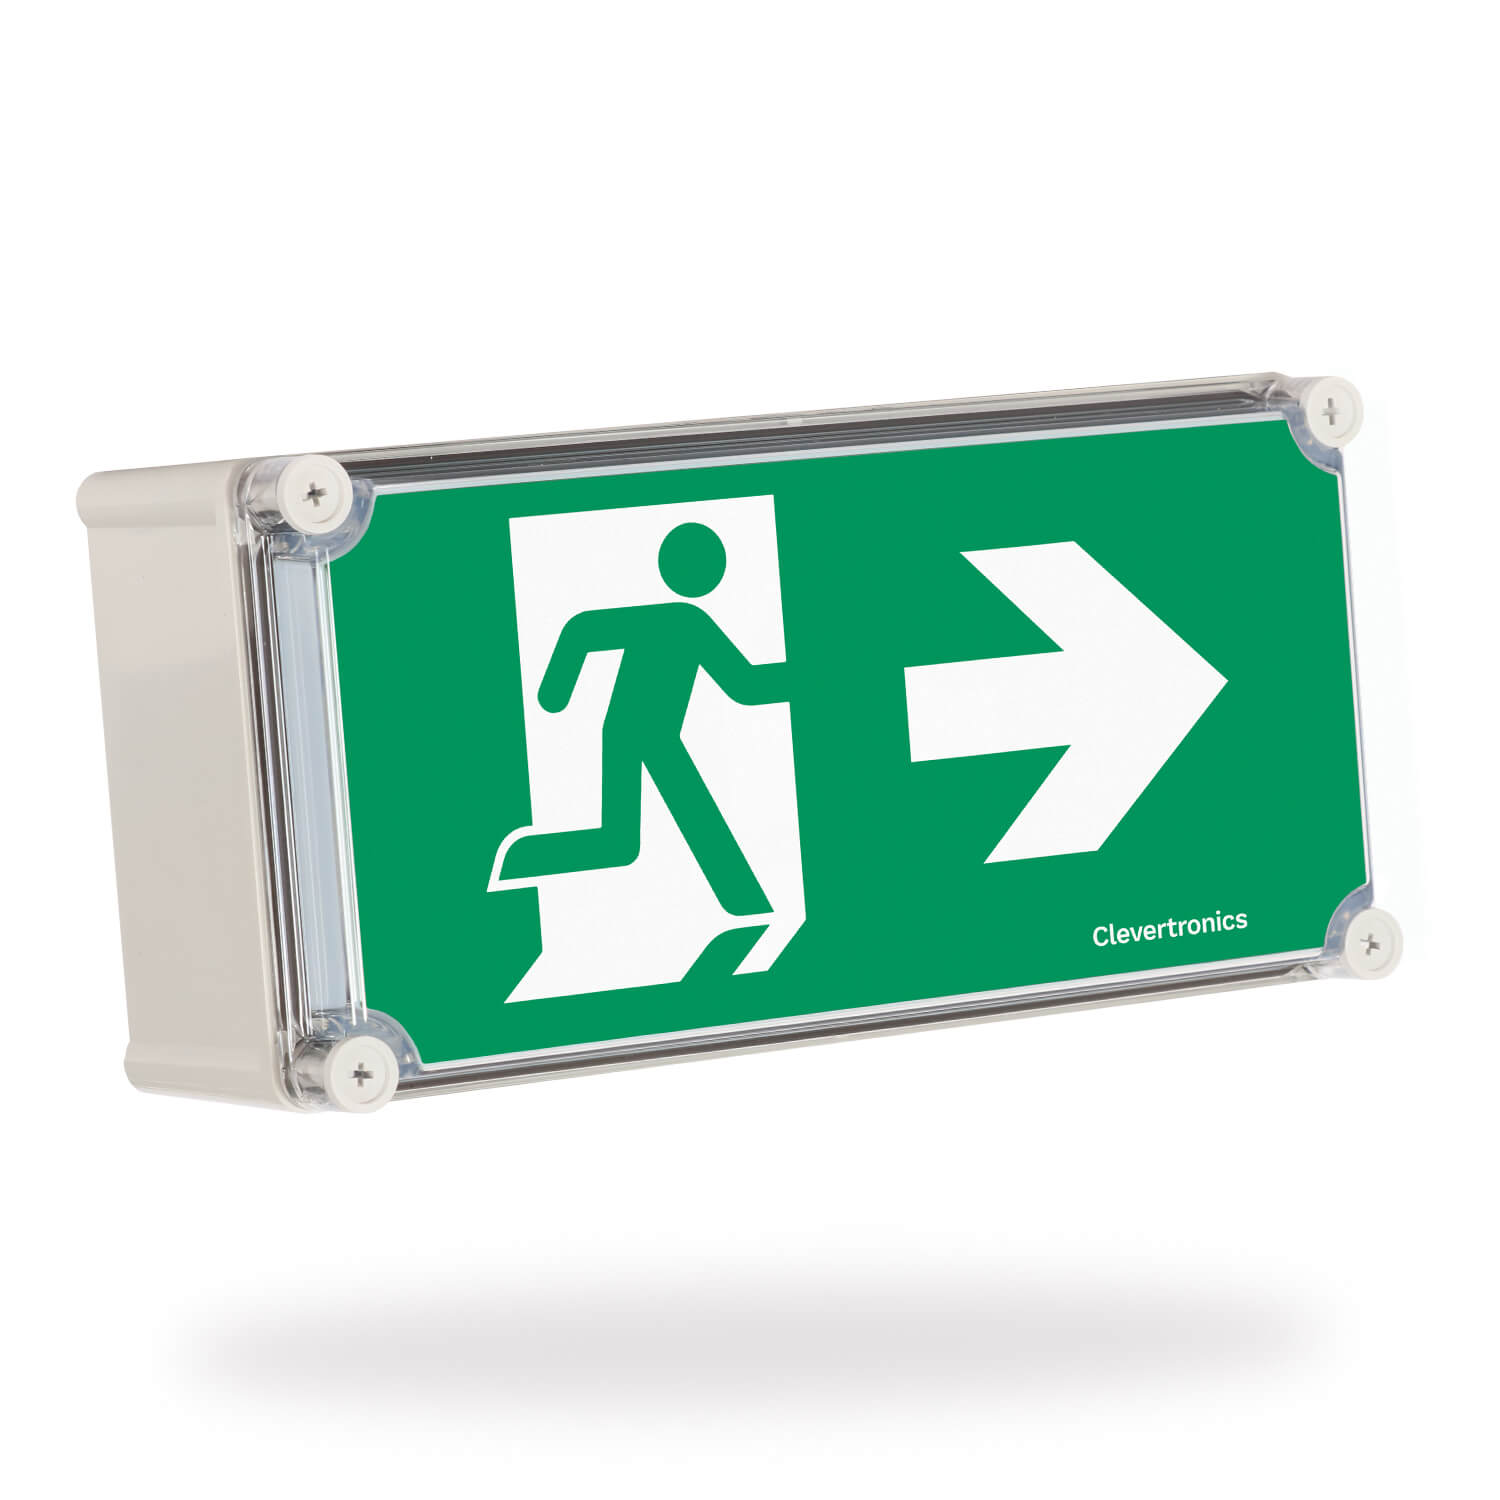 clevertronics emergency lighting exits uk weather proof wall mount 24m